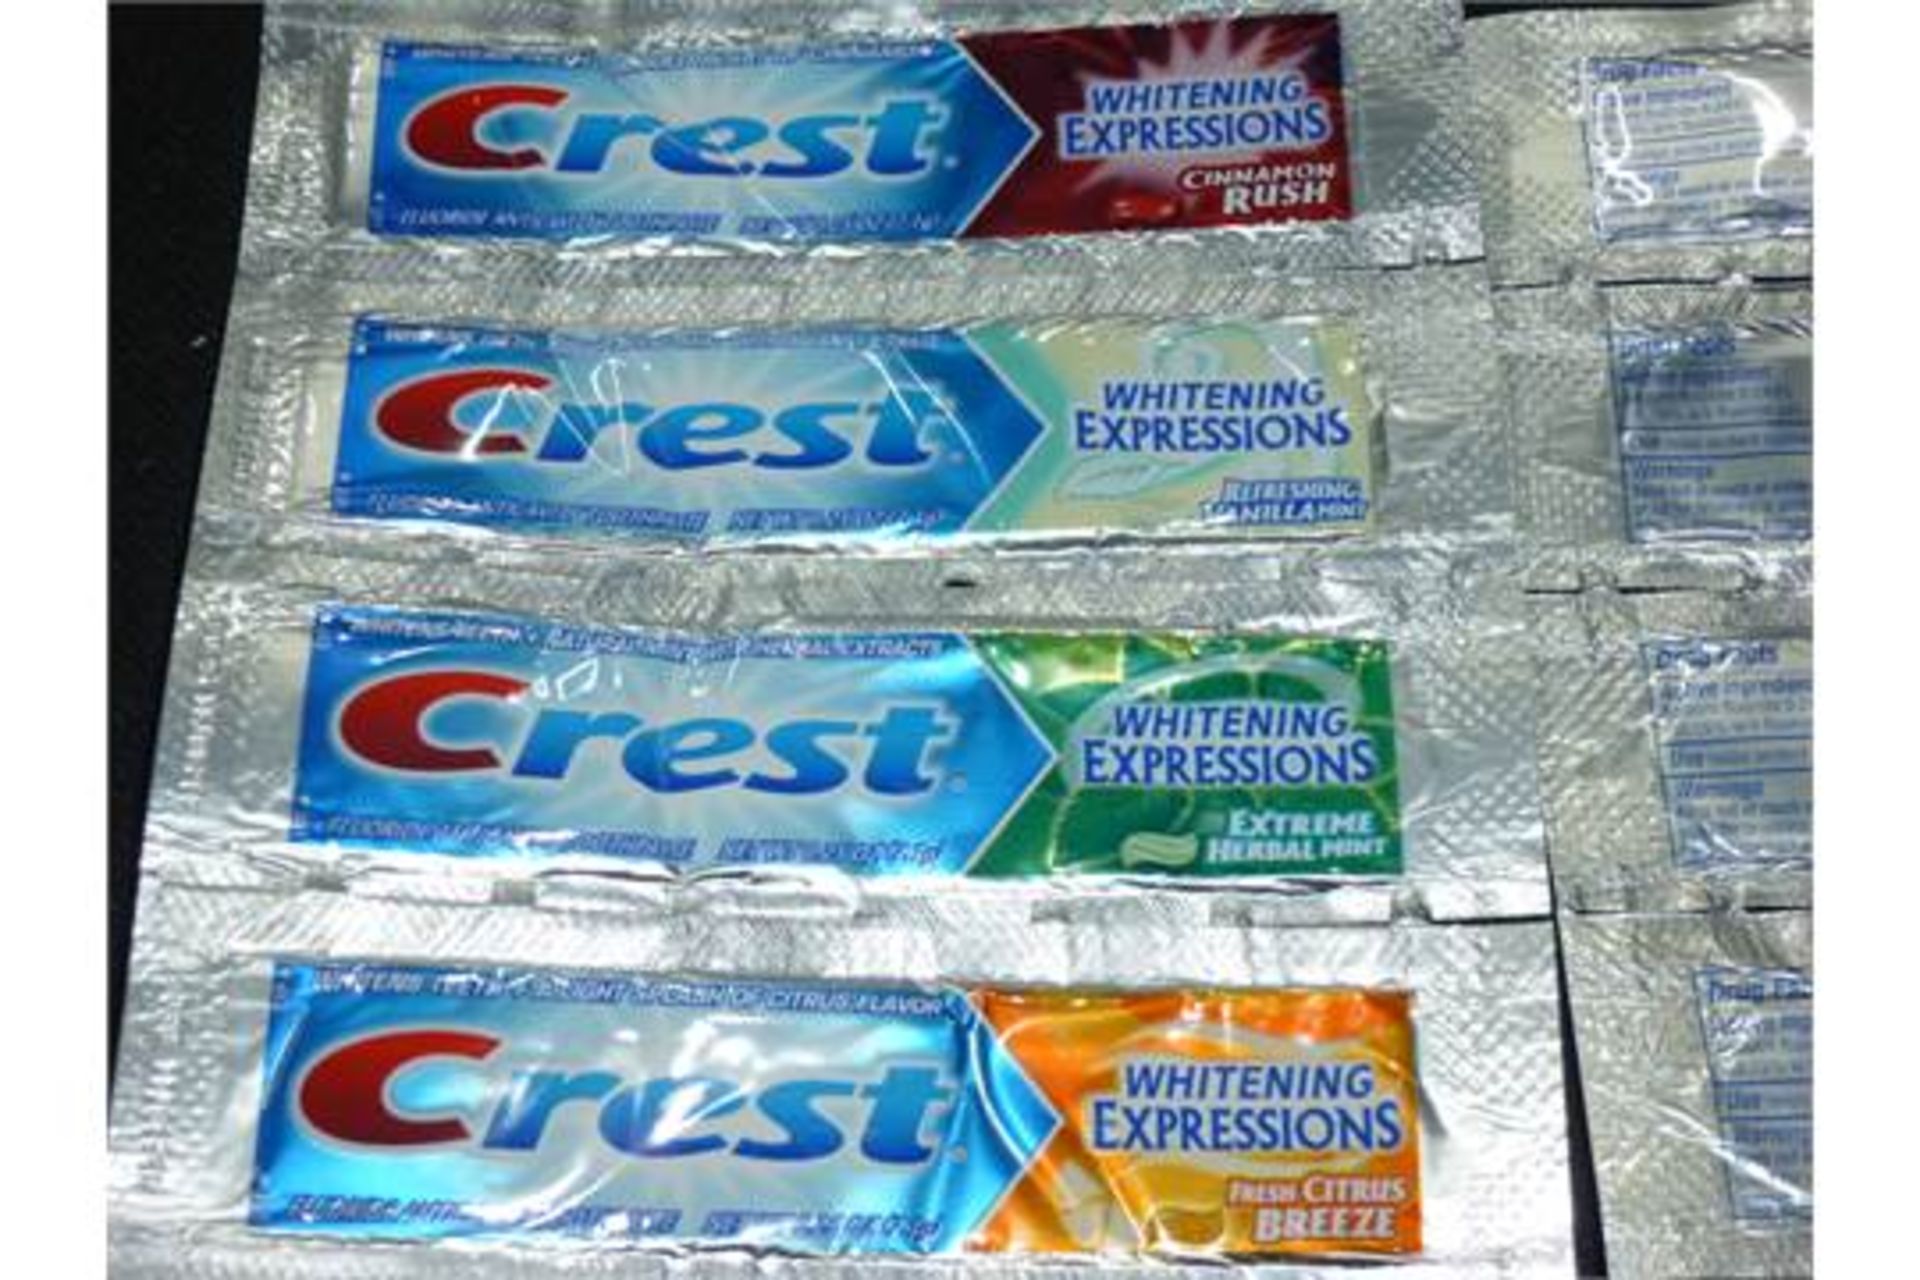 38 x 360 Crest Whitening Expressions